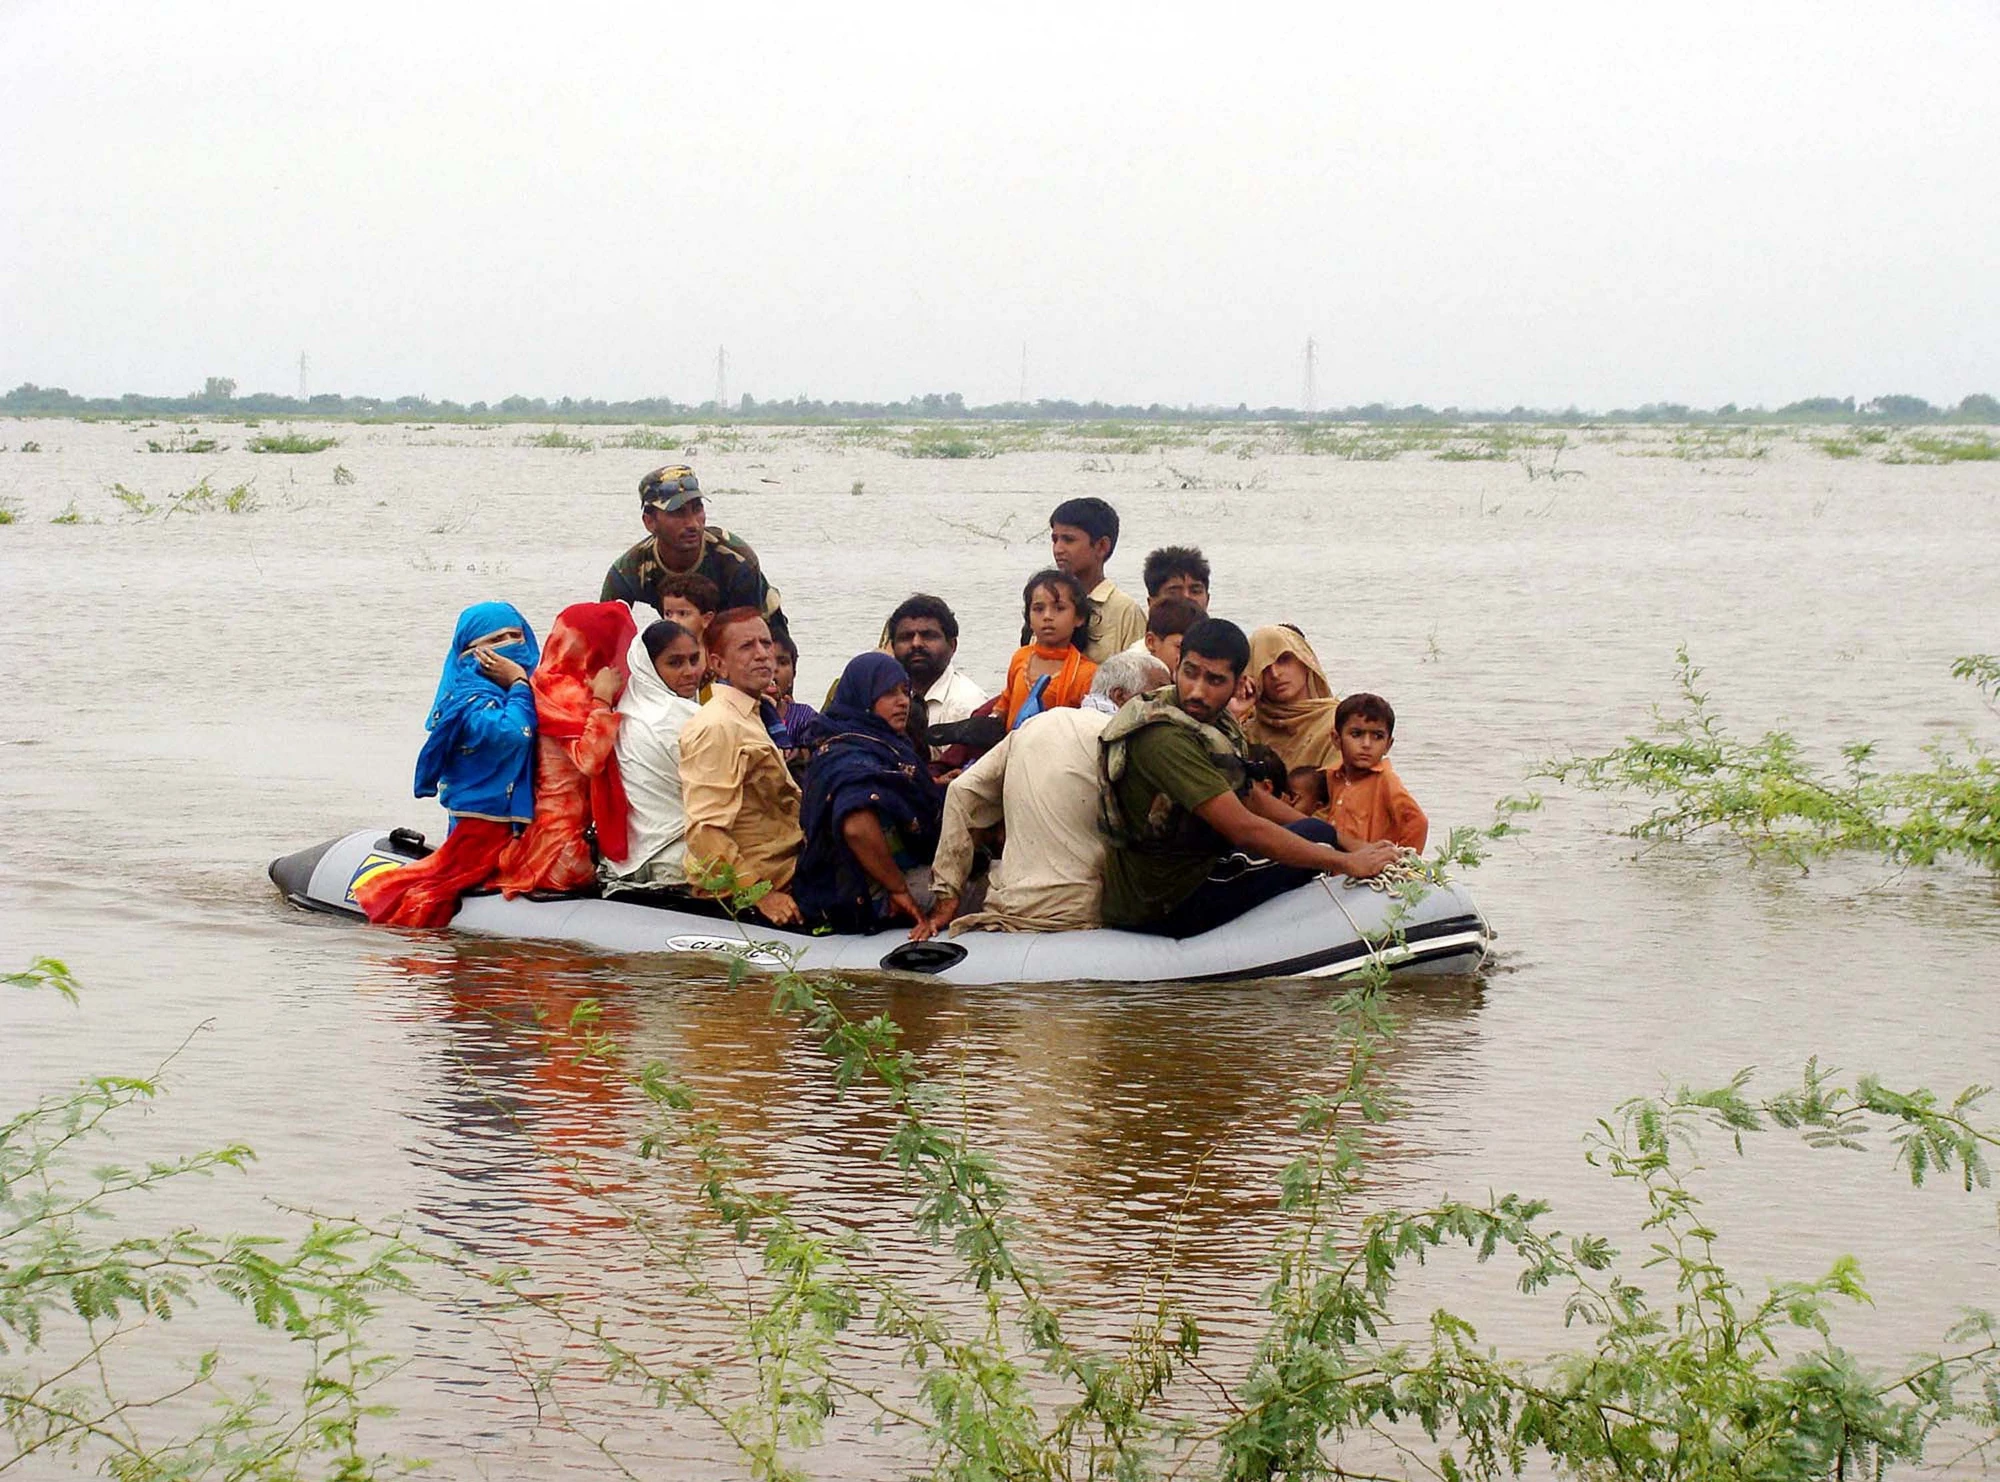 Navy soldiers shift flood-affected people towards safe place on boat at a flooded area due to heavy downpour of Monsoon season in Badin, Pakistan, 2011. Photo: Asianet-Pakistan/ Shutterstock